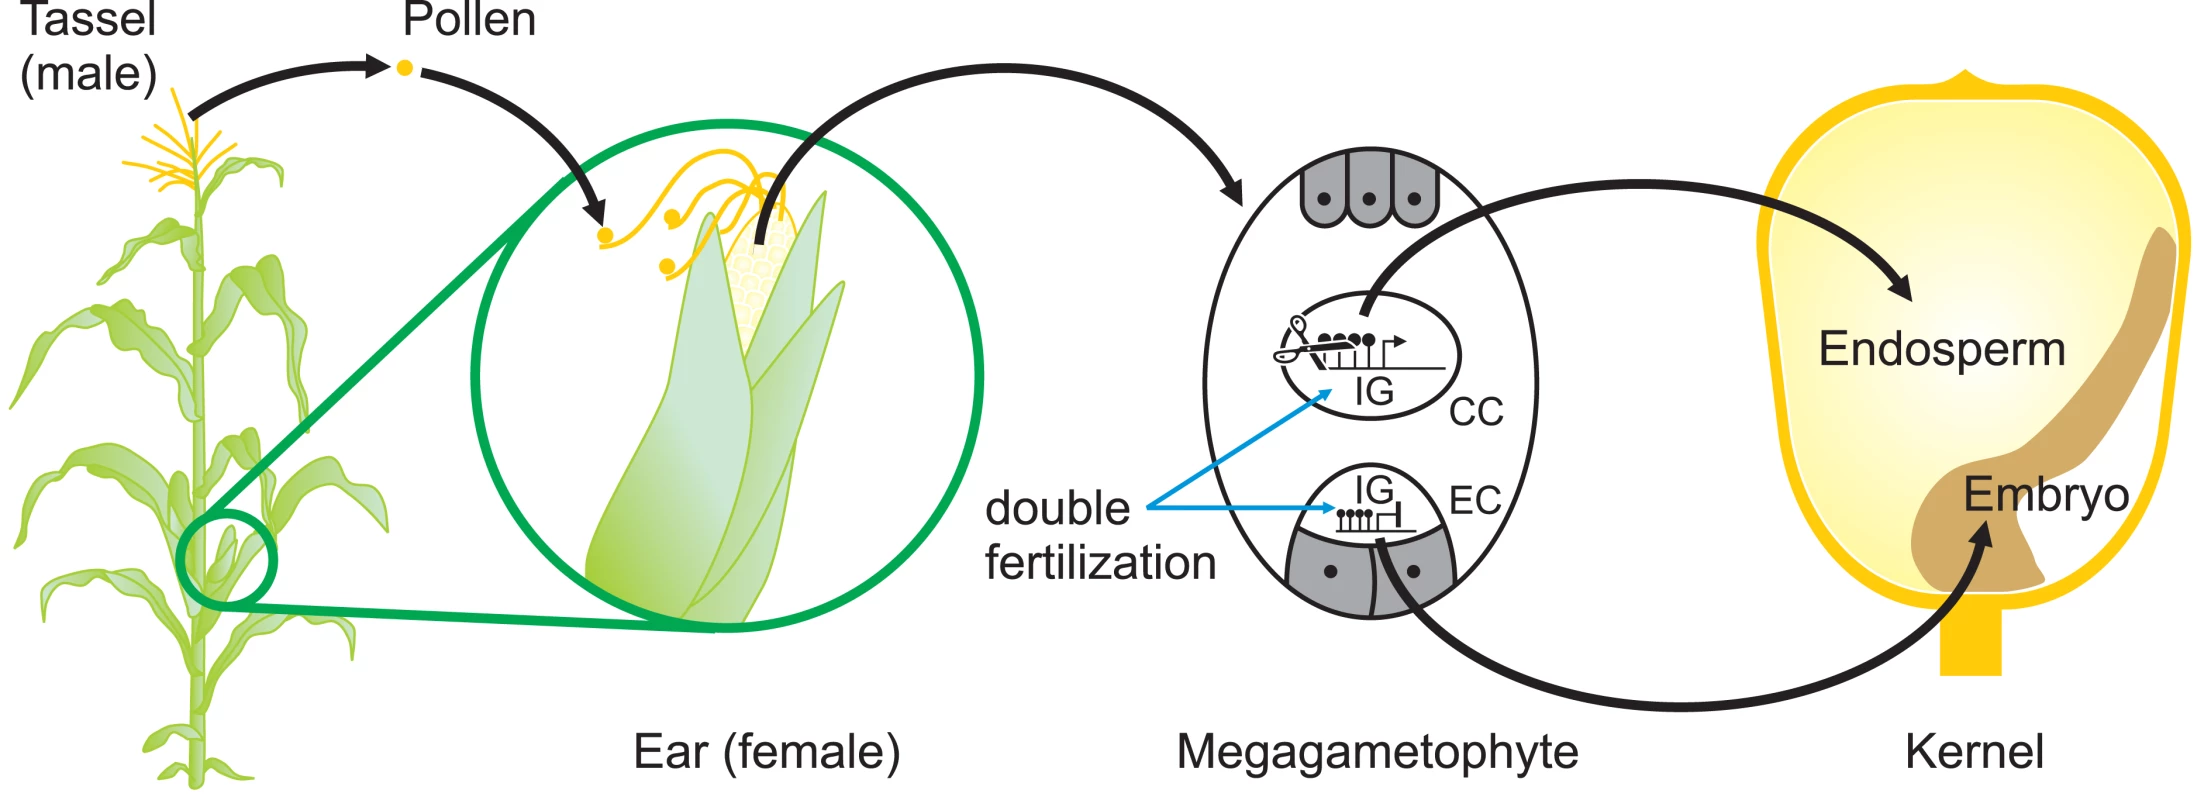 Sites of Potential Epigenetic Reprogramming during Maize Reproduction.